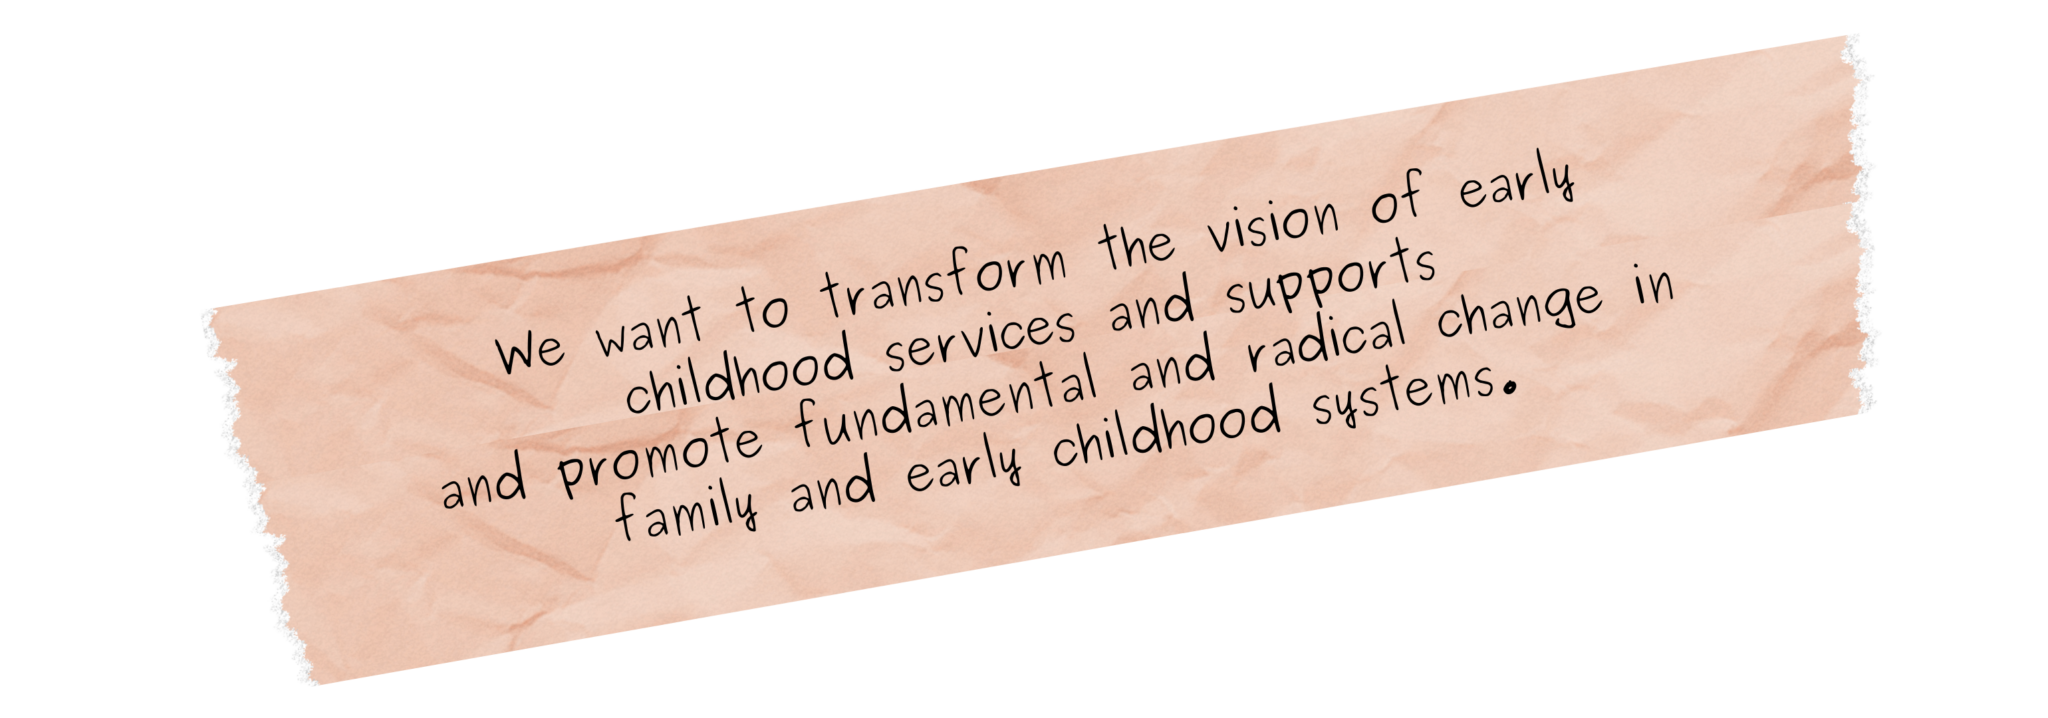 We want to transform the vision of early childhood services and supports and promote fundamental and radical change in family and early childhood systems.